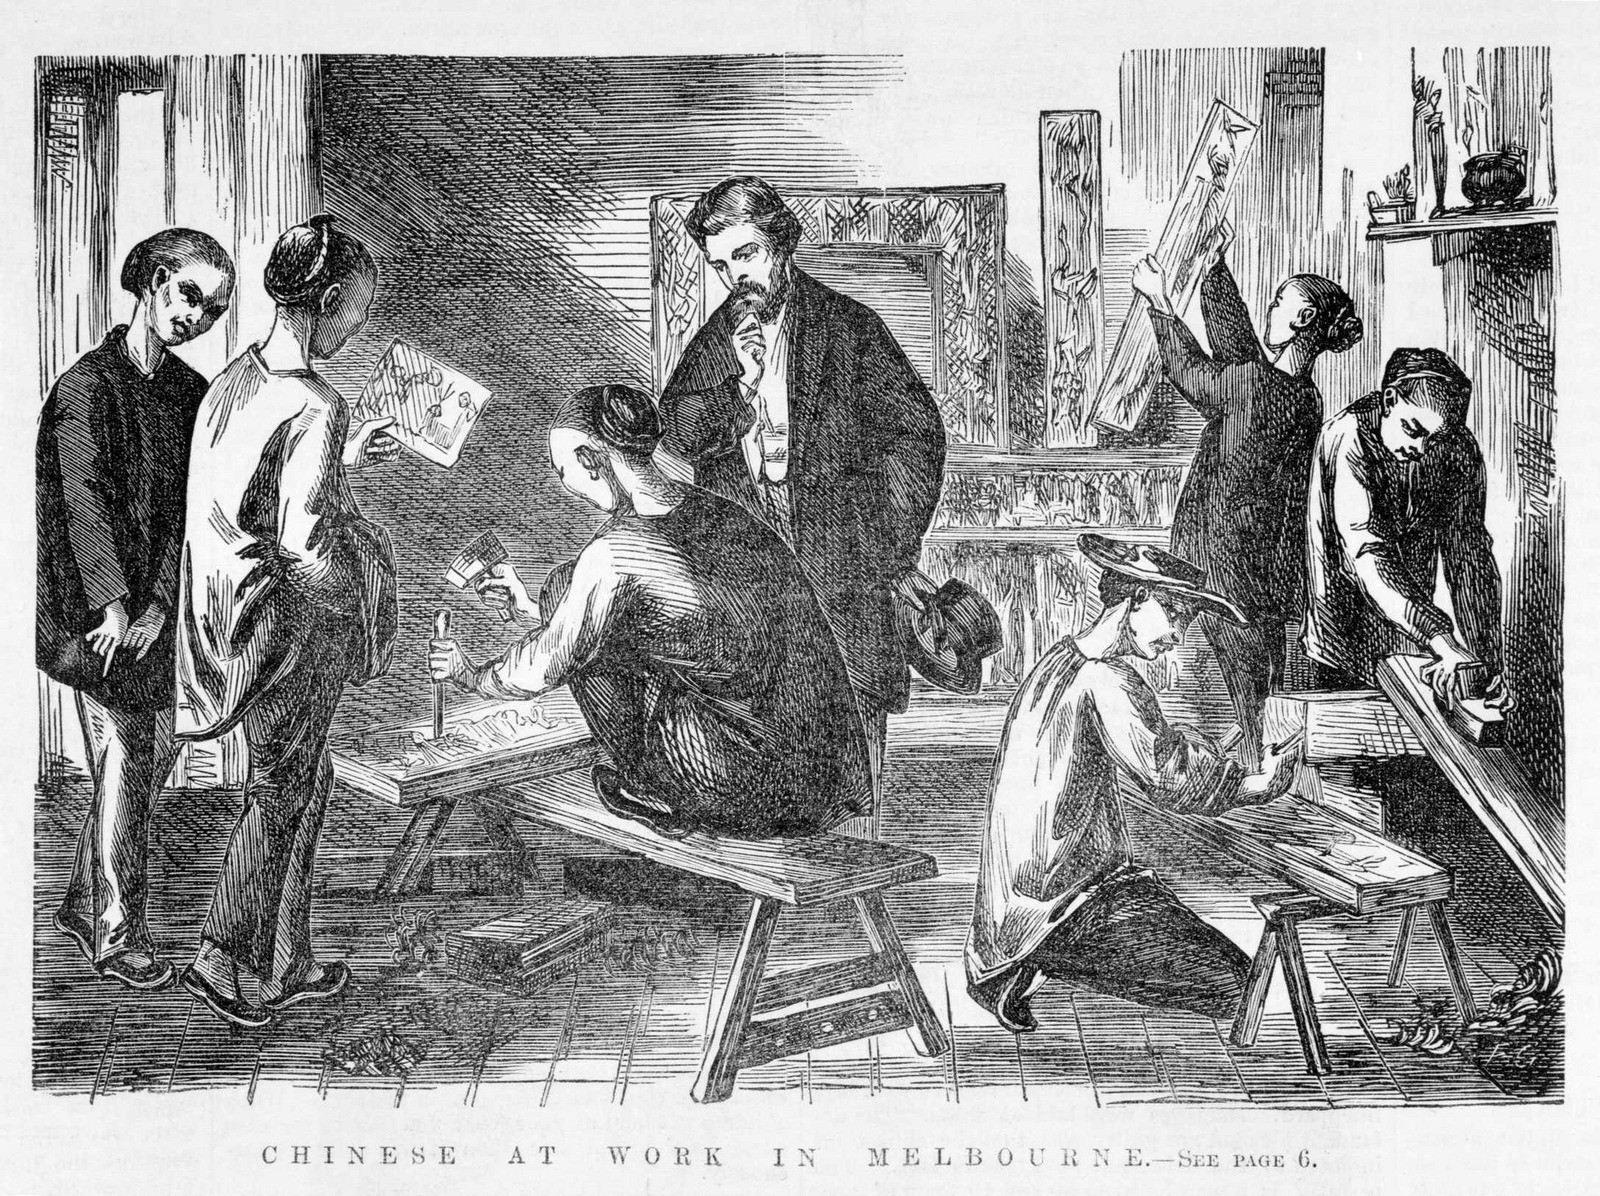 Engraving of Chinese men engaged in carving decorative panels while a European man looks on